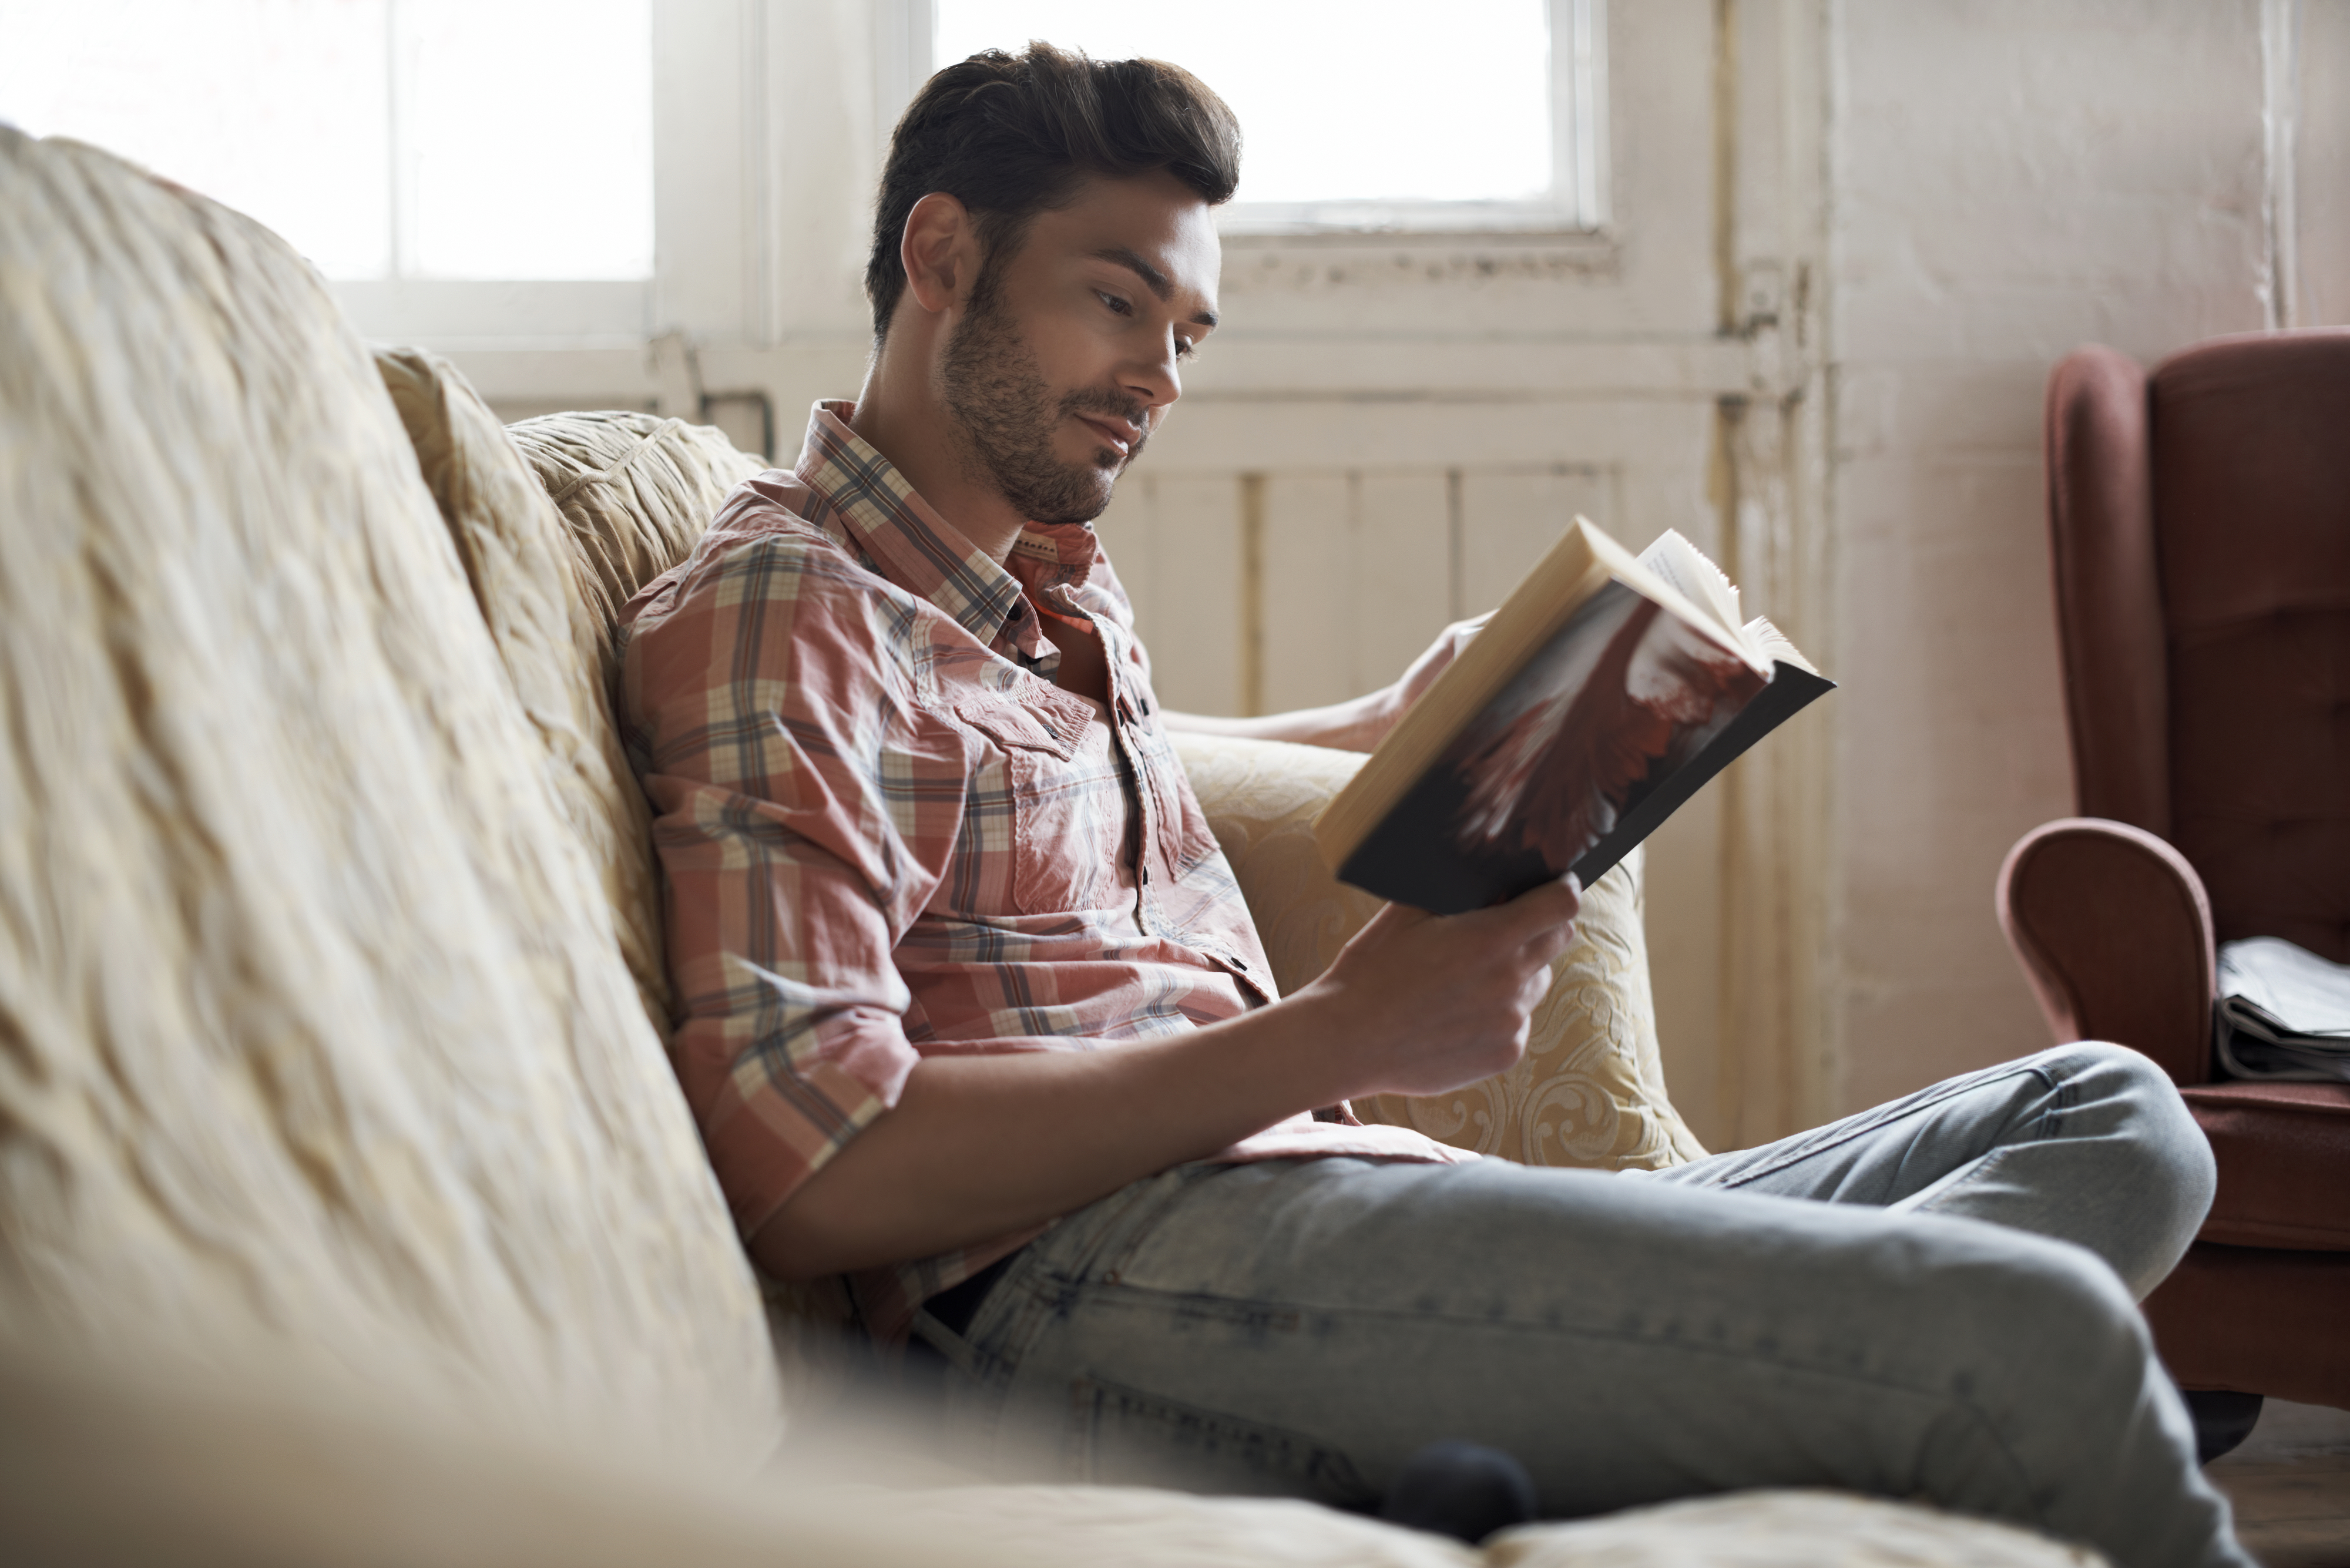 Man in casual shirt sitting on a couch, reading a book with interest